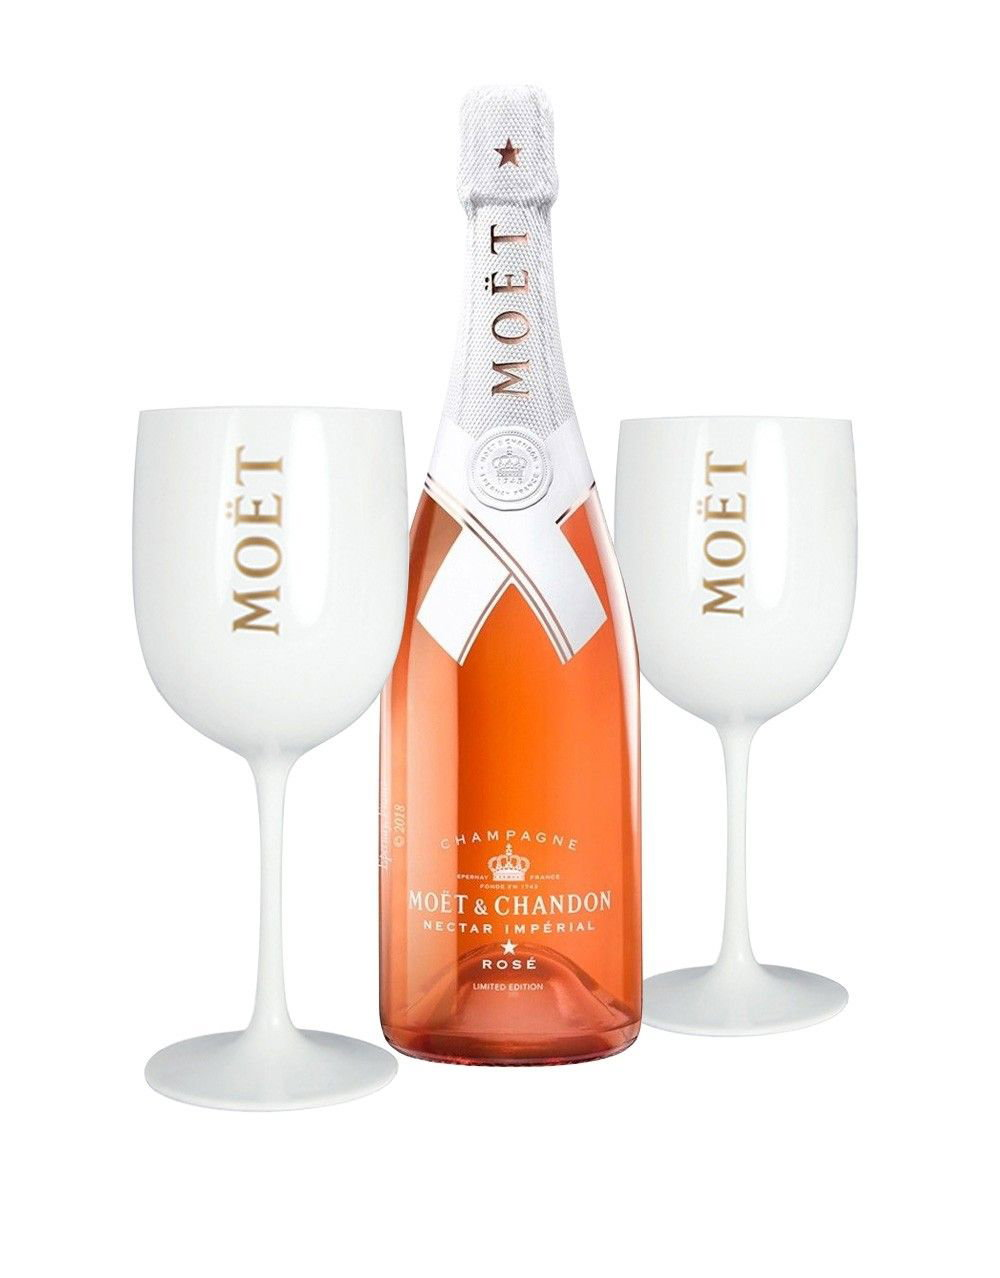 ReserveBar - One of today's most celebrated creatives, Virgil Abloh has  debuted a limited edition collection of custom-designed bottles of Moët &  Chandon Nectar Impérial #Rosé, marking the designer's first-ever wine 